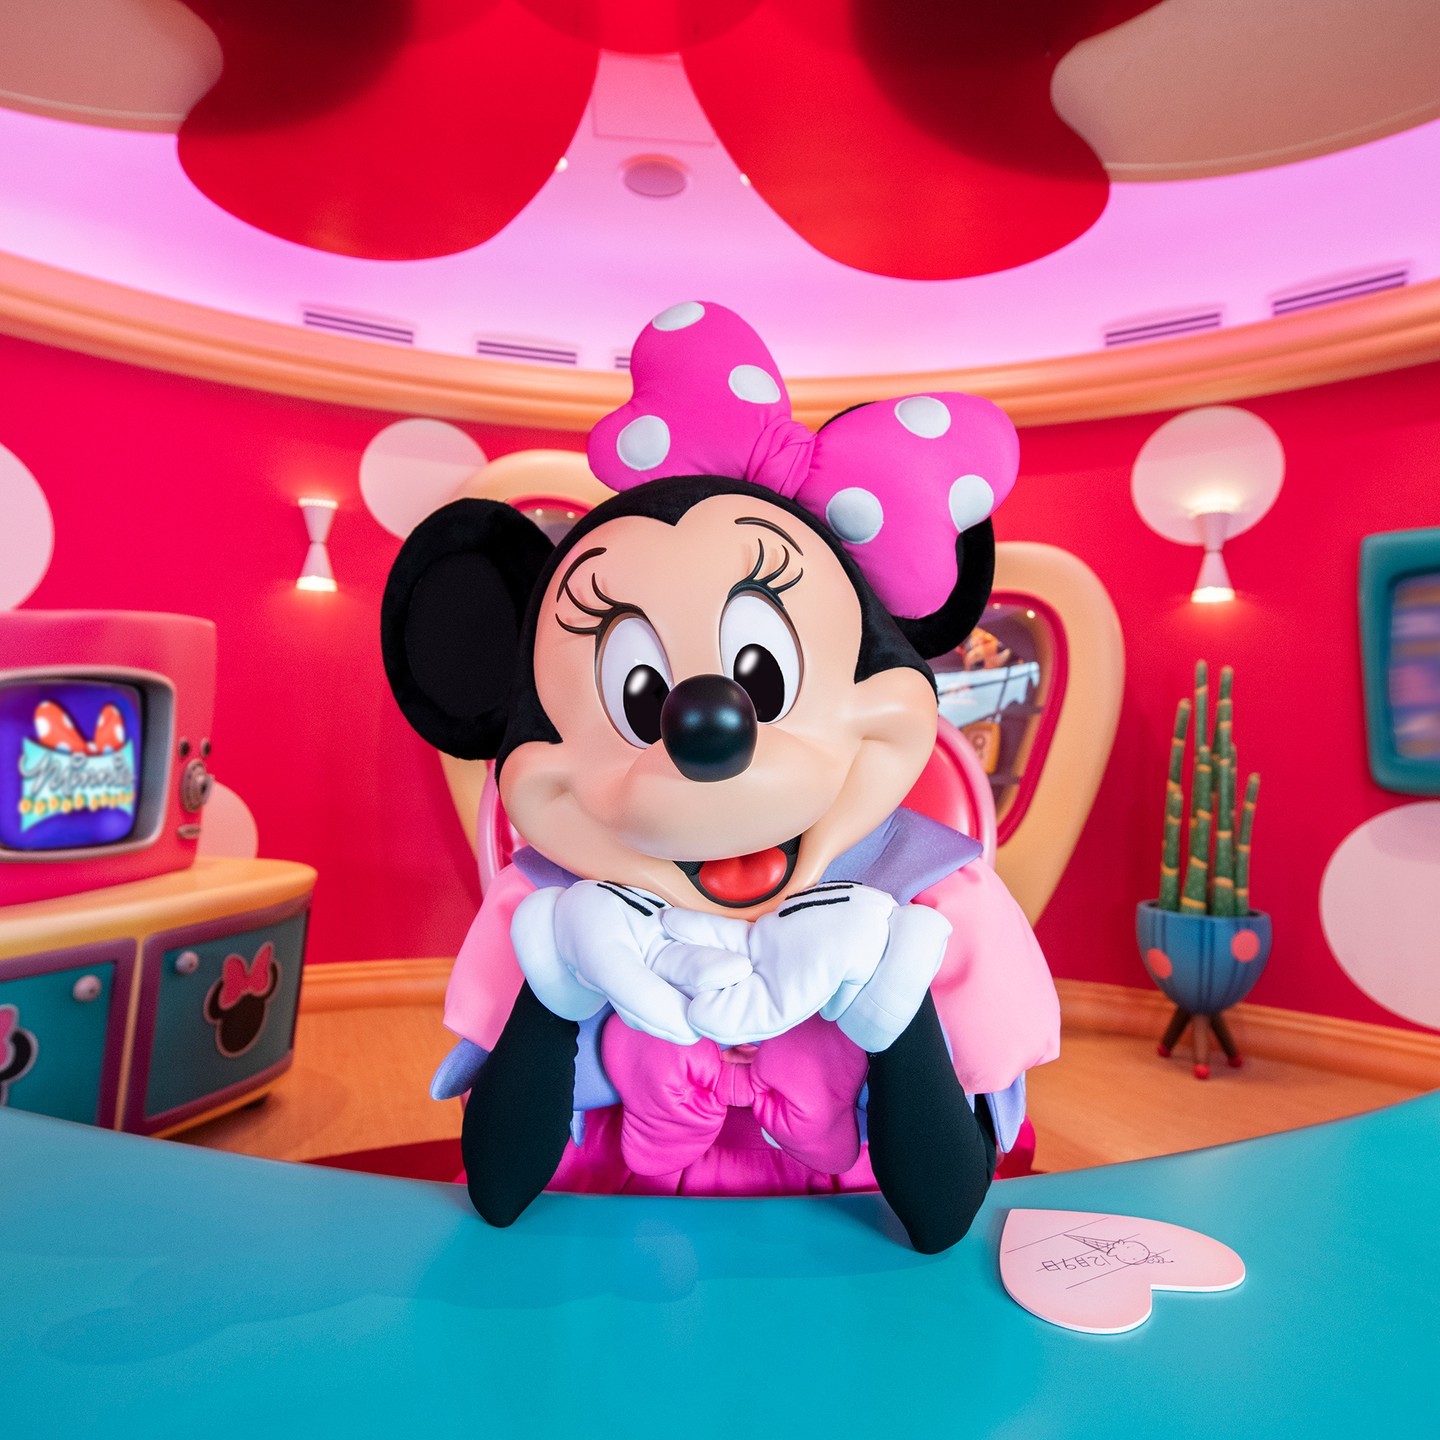 Minnie is always ready for her closeup!
そんなに見つめられると照れちゃうね❤️
#minniemouse...的图像